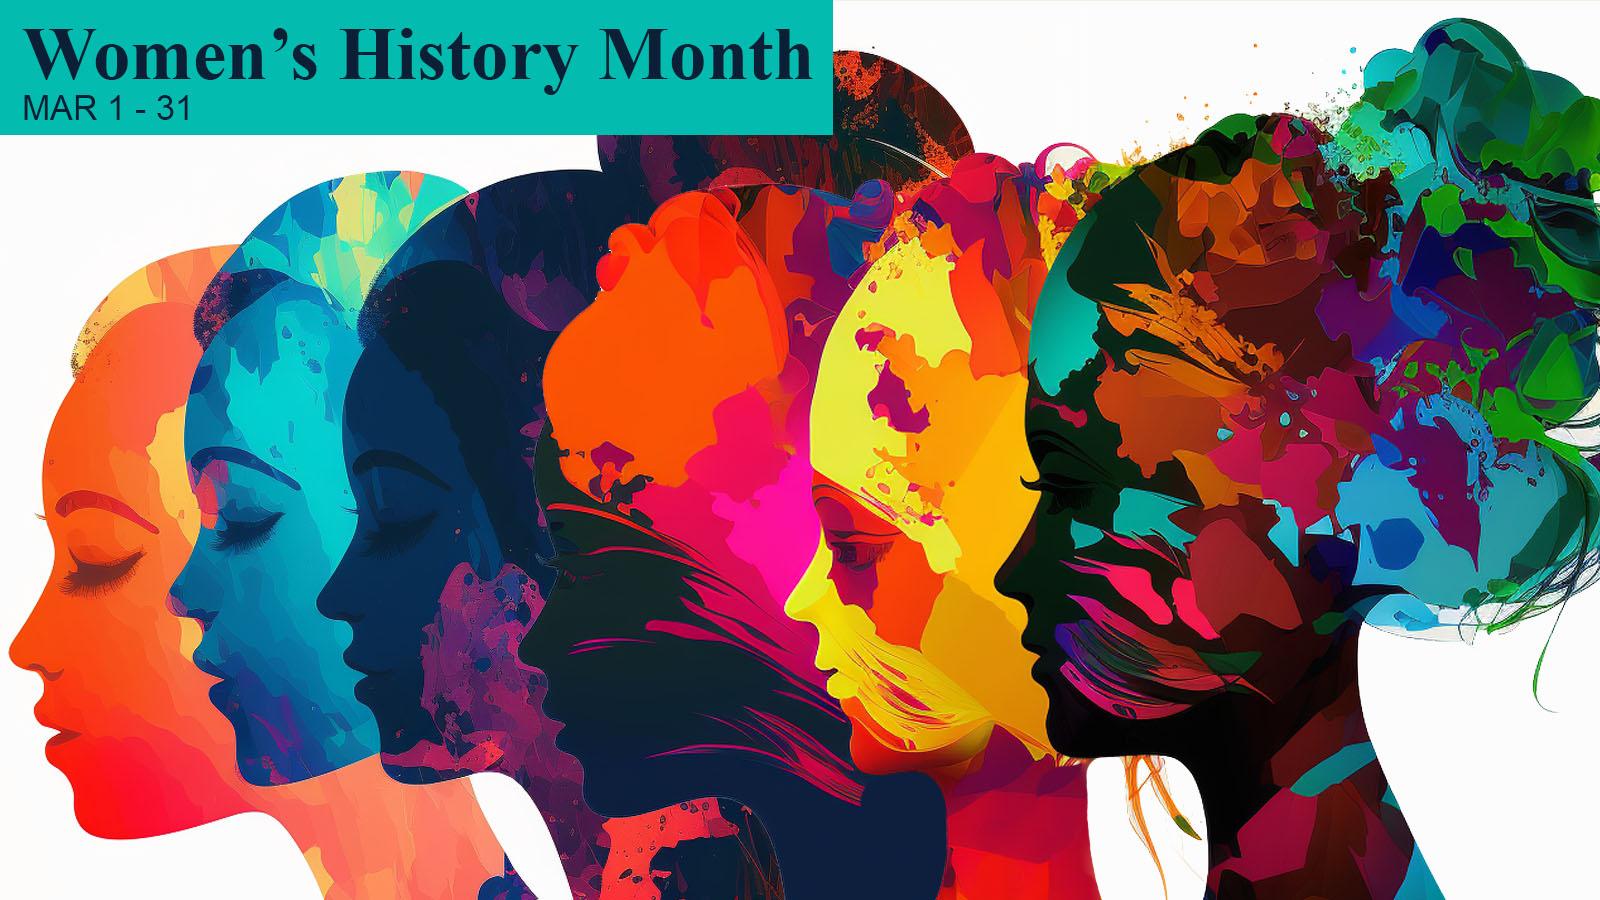 Women's History Month March 1-31